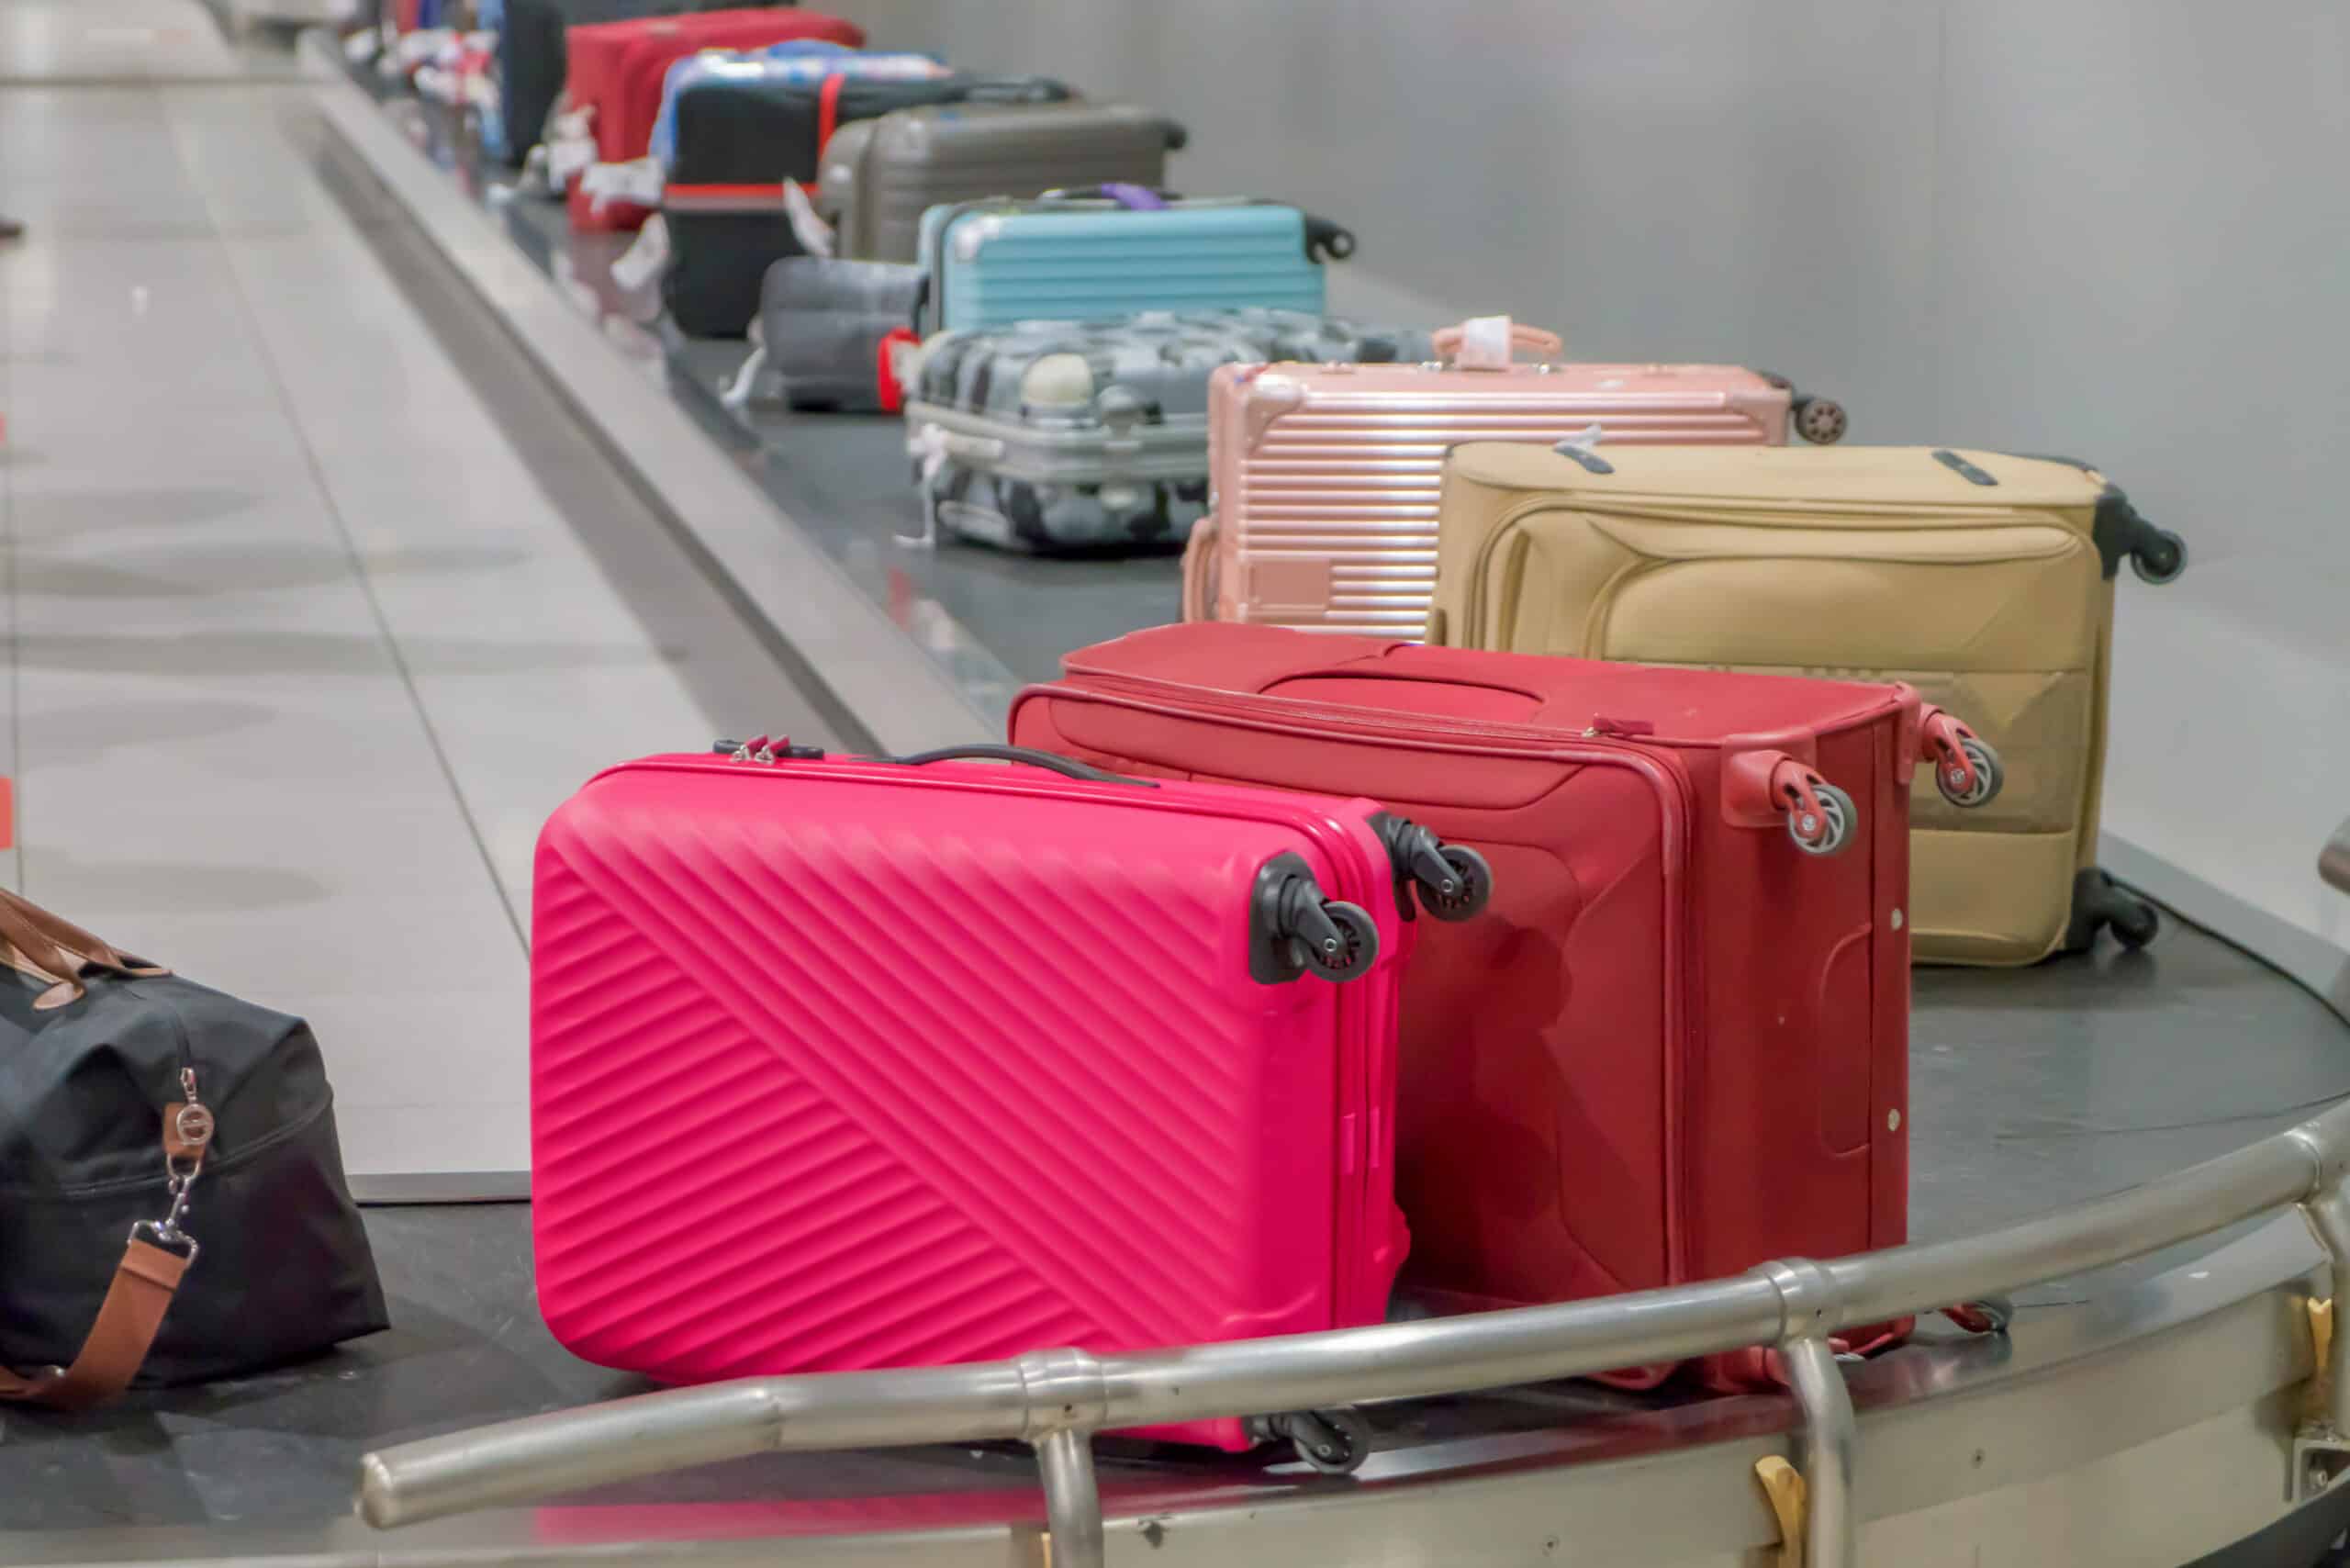 Where can I store my luggage for a few hours? Luggage in airport carousel.